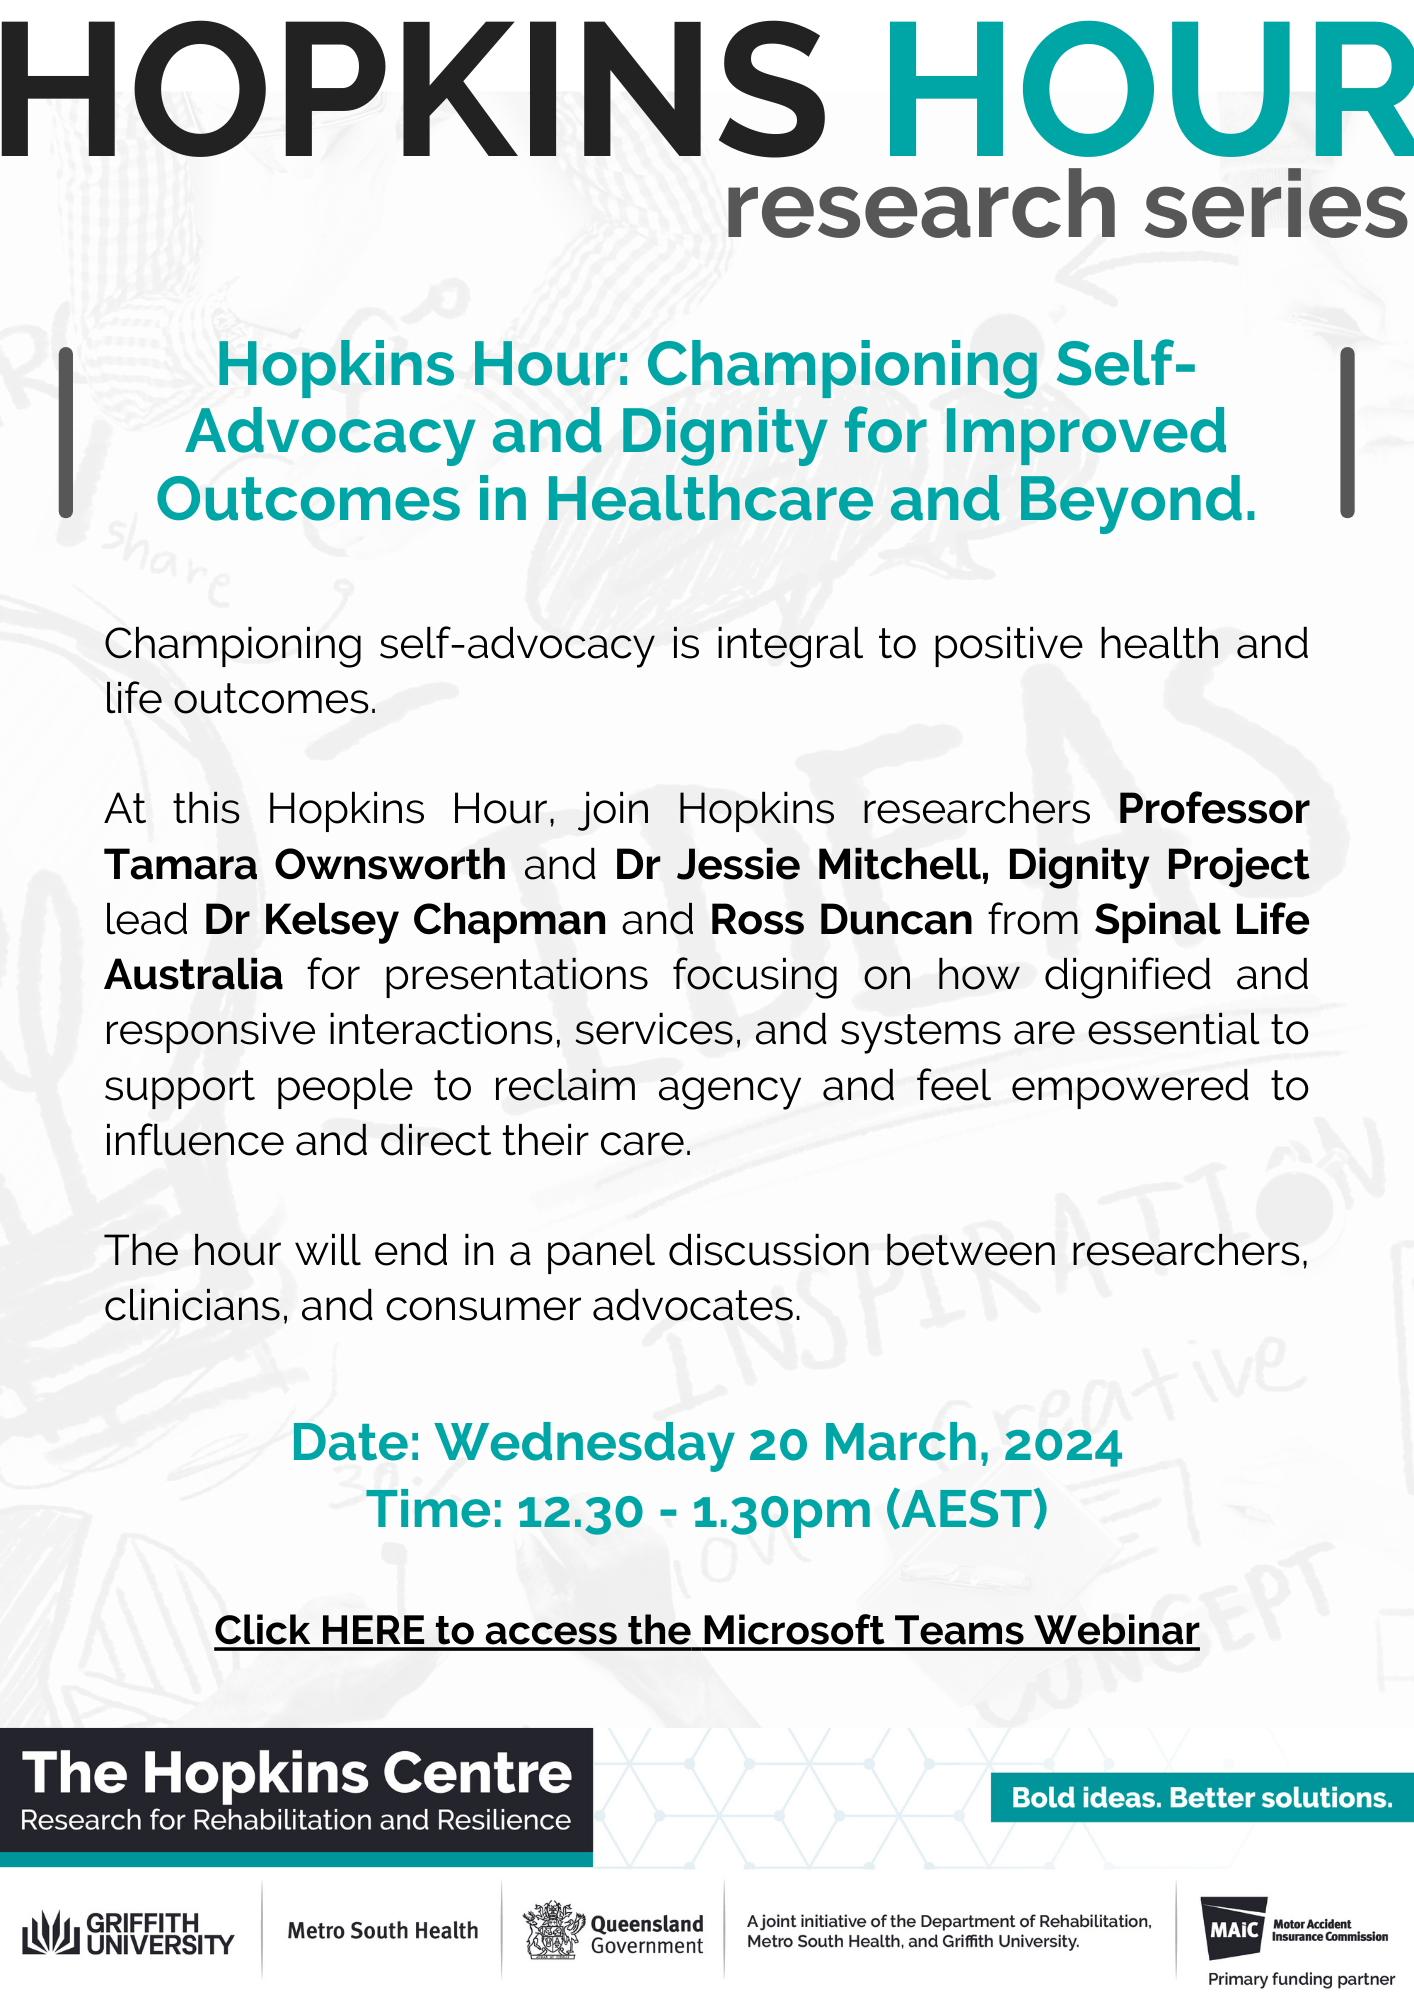 Hopkins Hour flyer with watermarked background containing inspirational images and words. Hopkins Hour title is at the top, with the name of this event in turquoise. The body of the flyer contains relevant information about the event in black text. The Hopkins Centre logos are at the bottom.